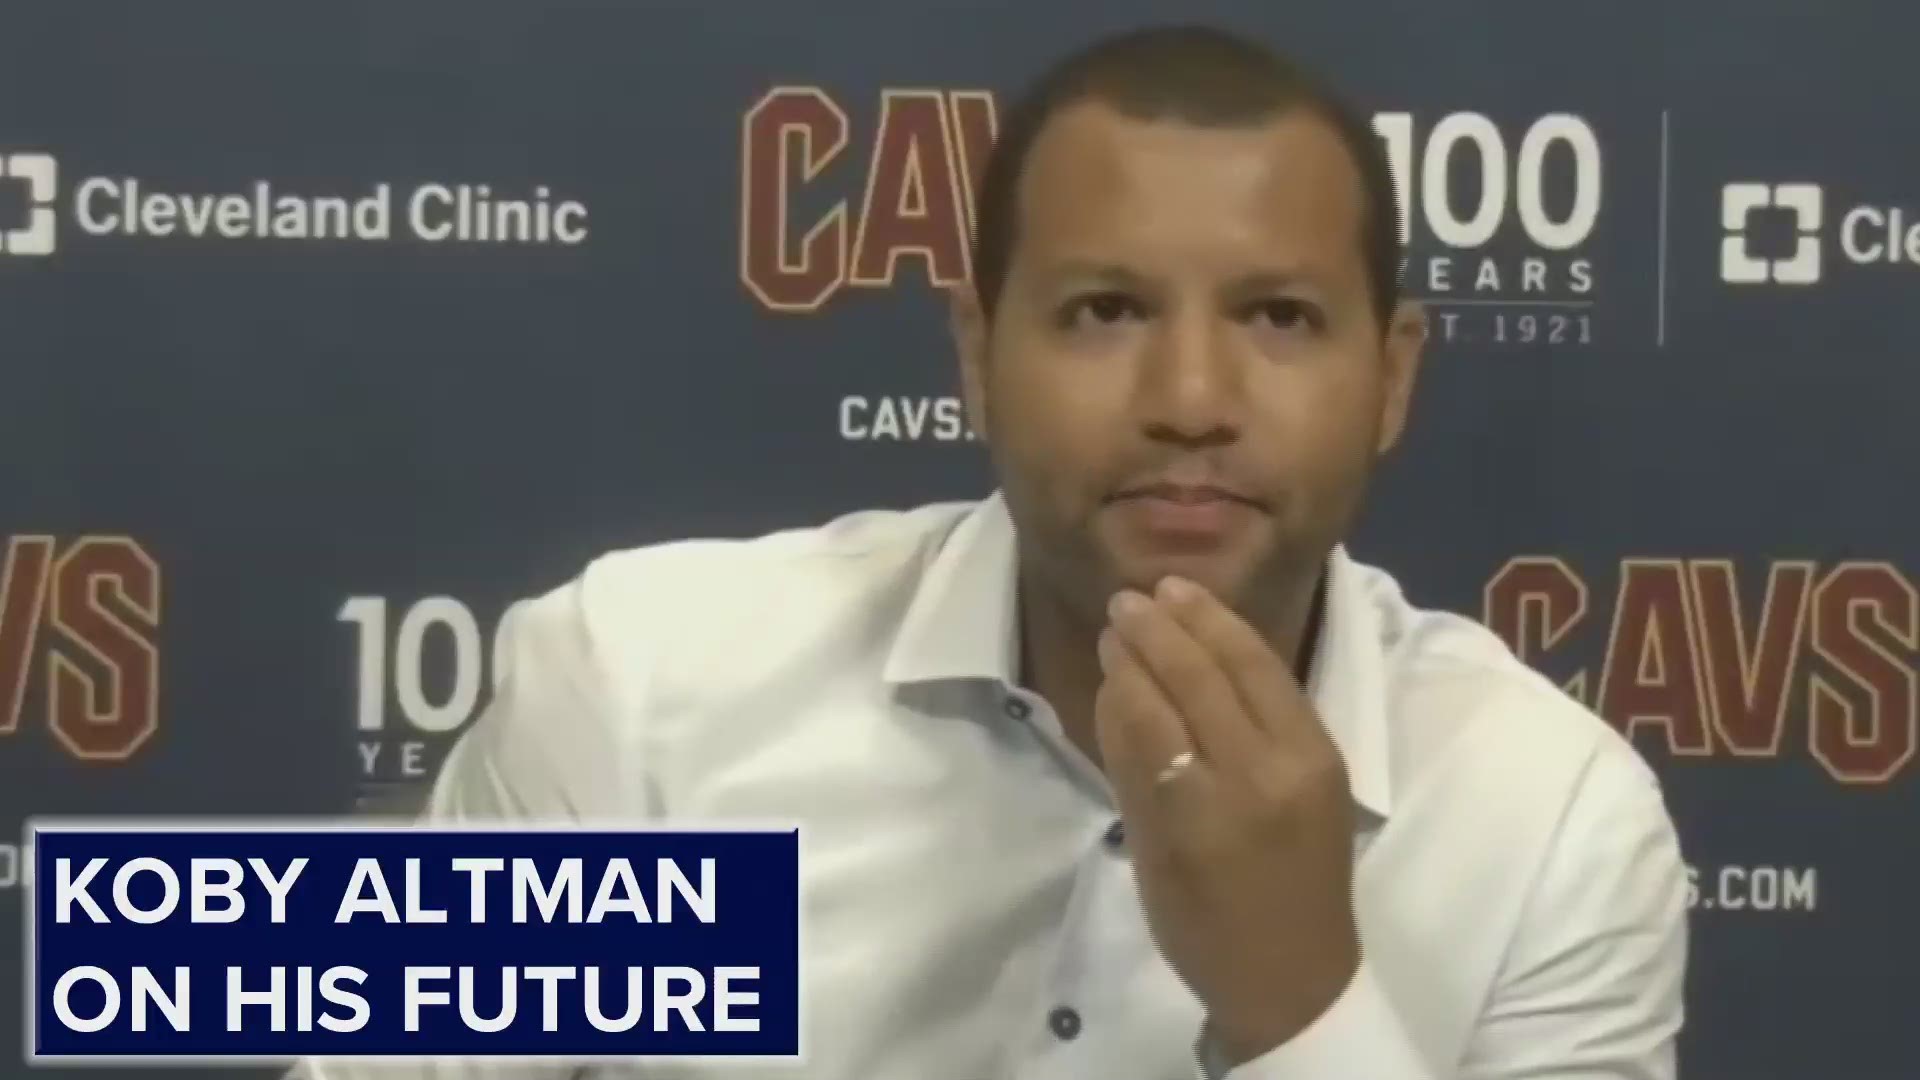 Cleveland Cavaliers' General Manager Koby Altman discusses his future with the organization.